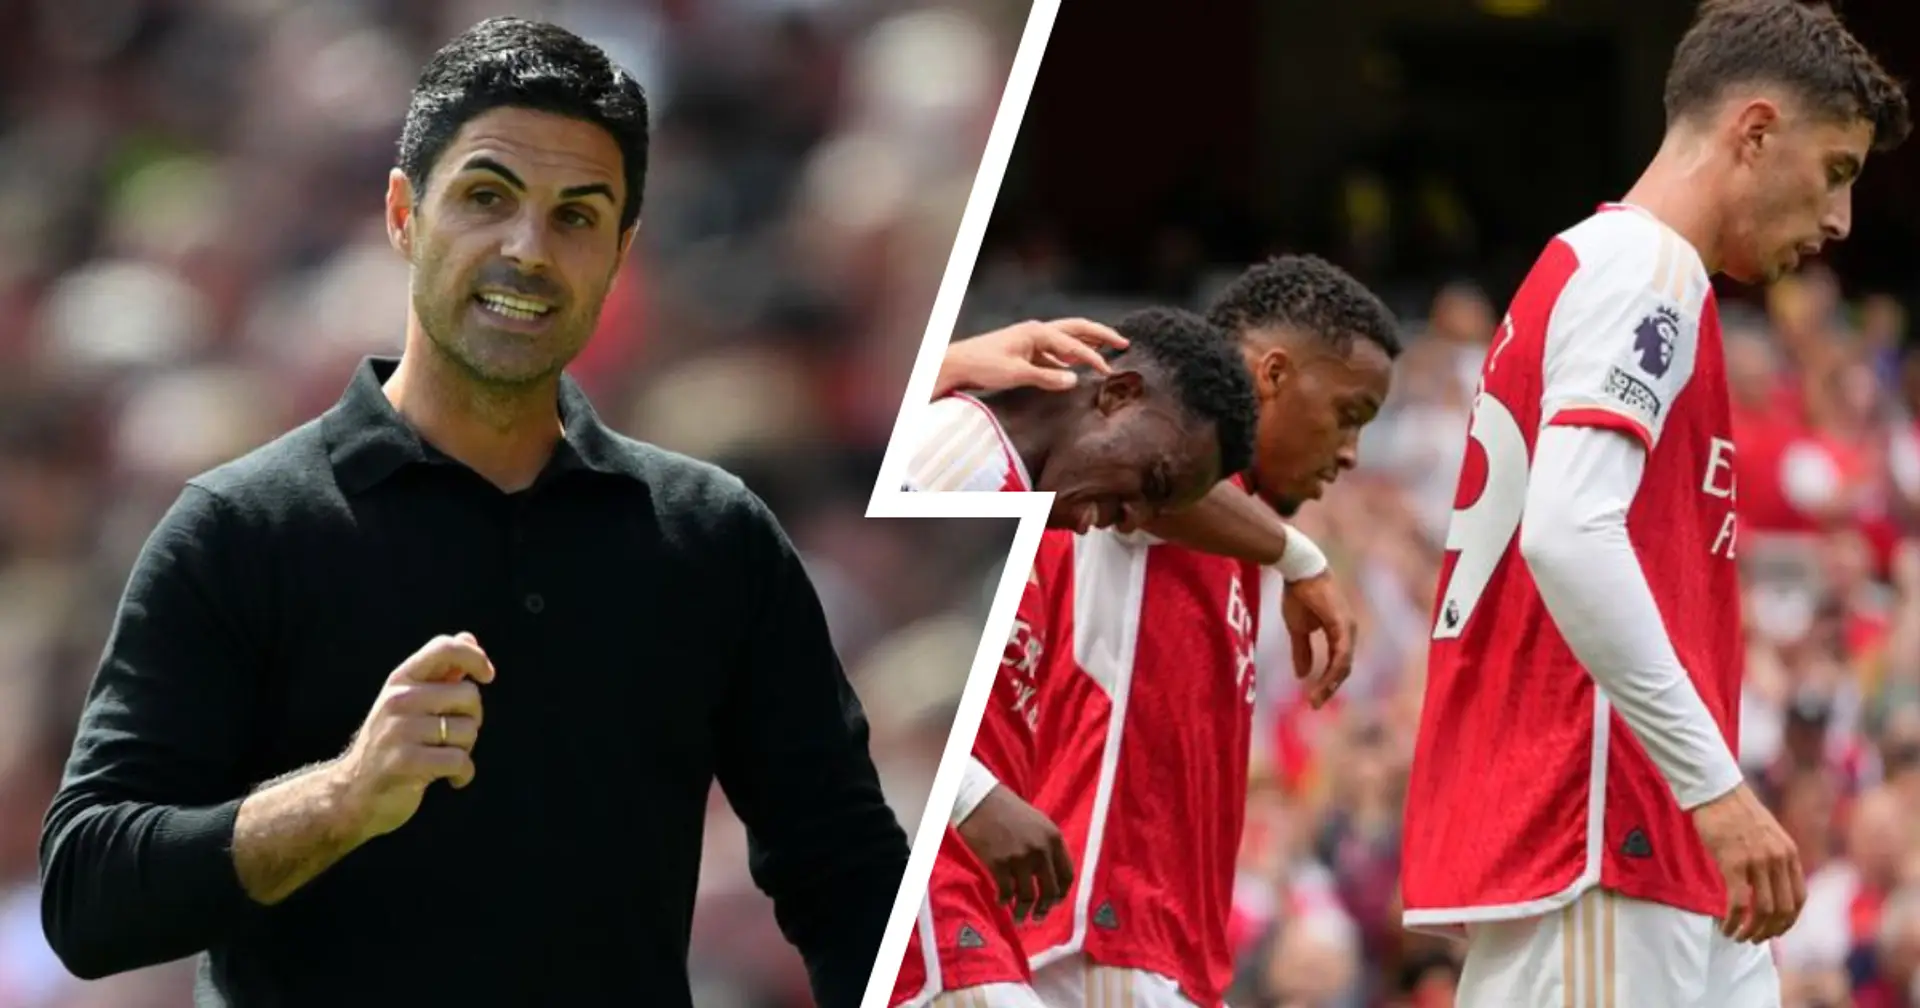 More experience needed? Arsenal have one of the youngest squads in the Premier League